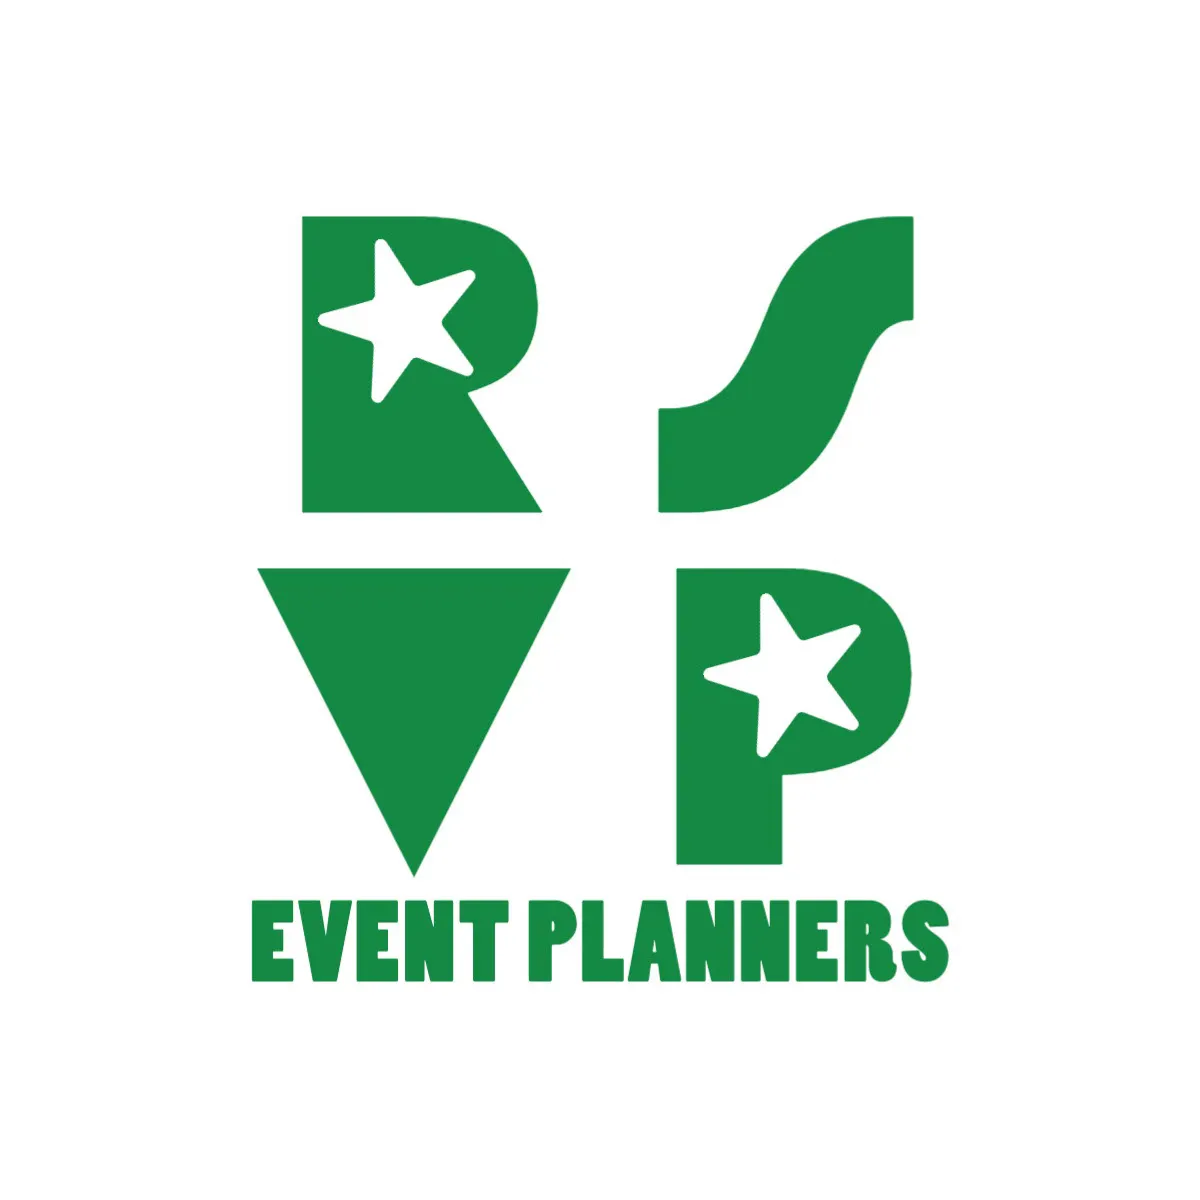 Green And White Event Planer Logo